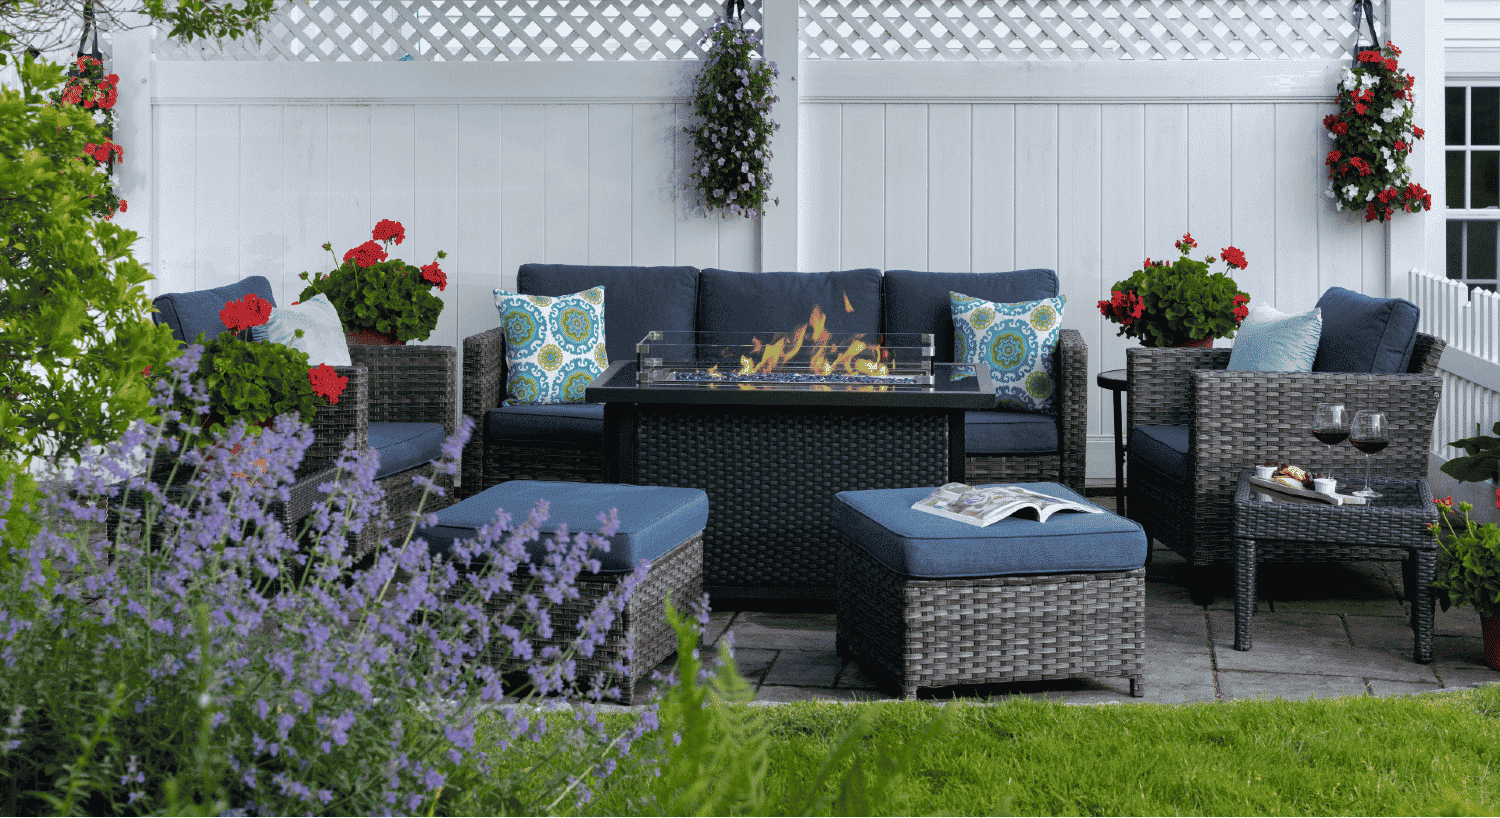 Outdoor fire pit area with wicker furniture with blue cushions by white privacy fence